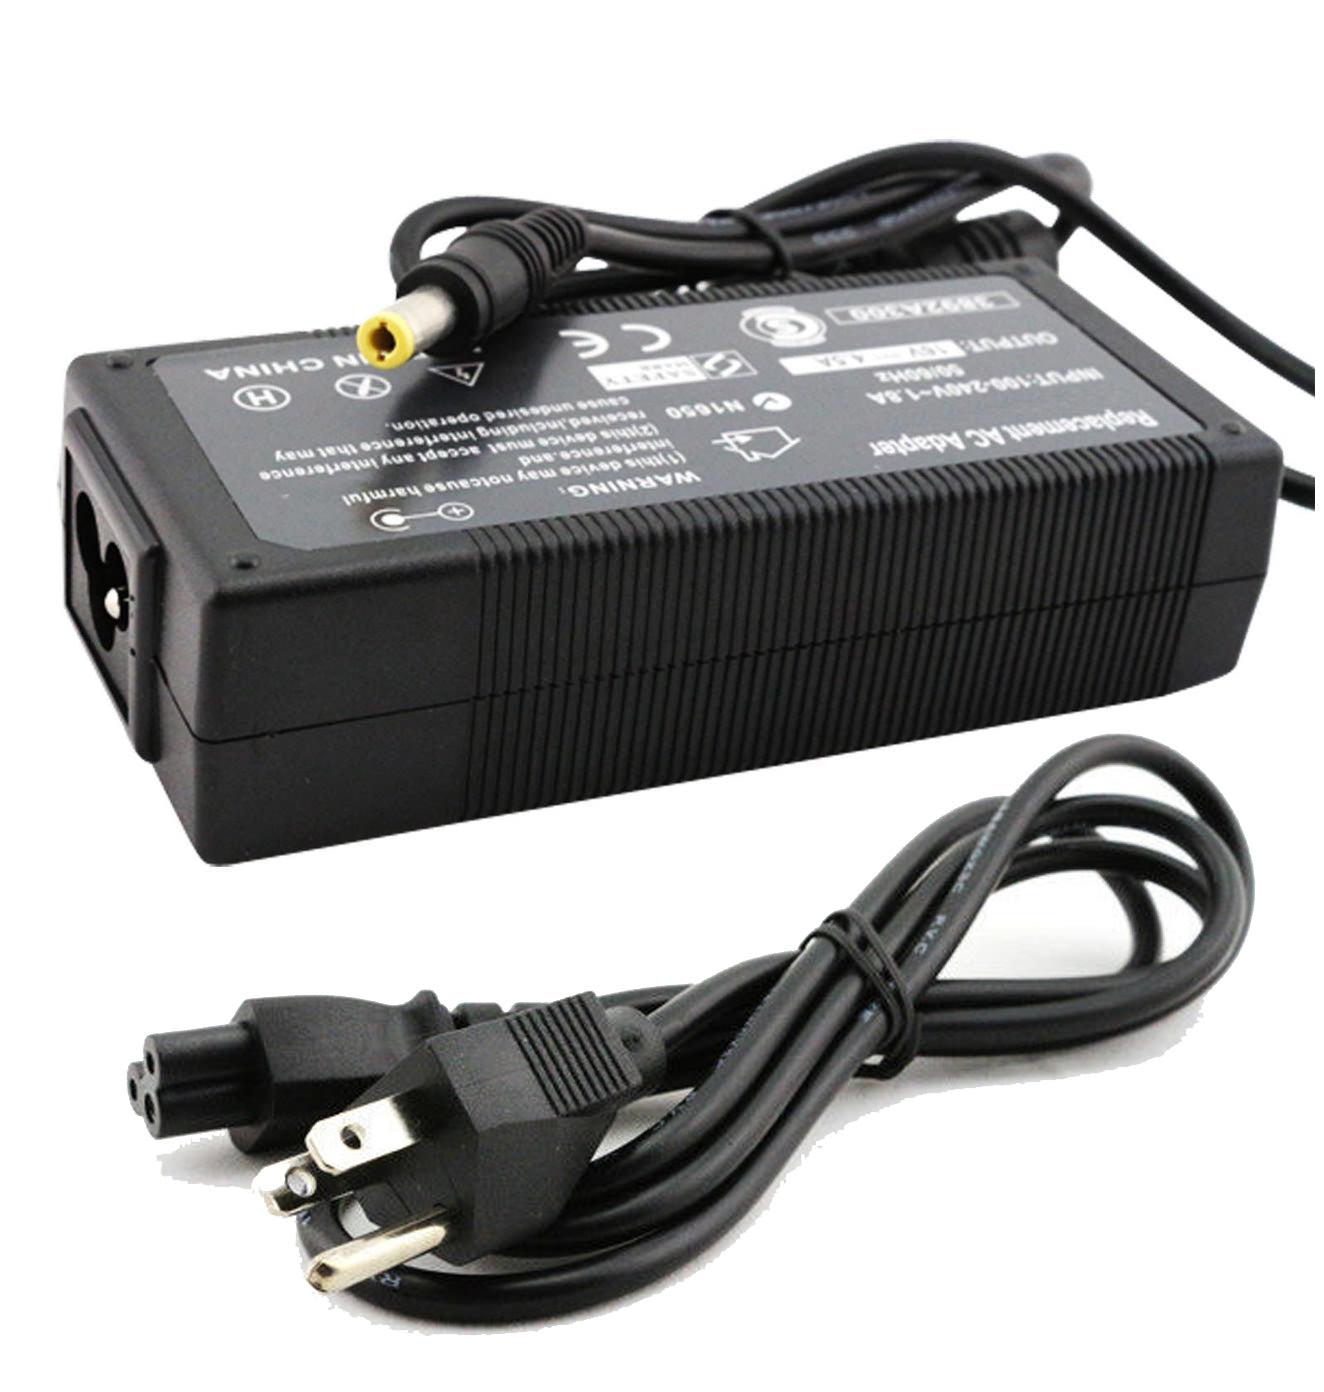 AC Adapter Charger for Panasonic Toughbook CF-W7 Notebook.